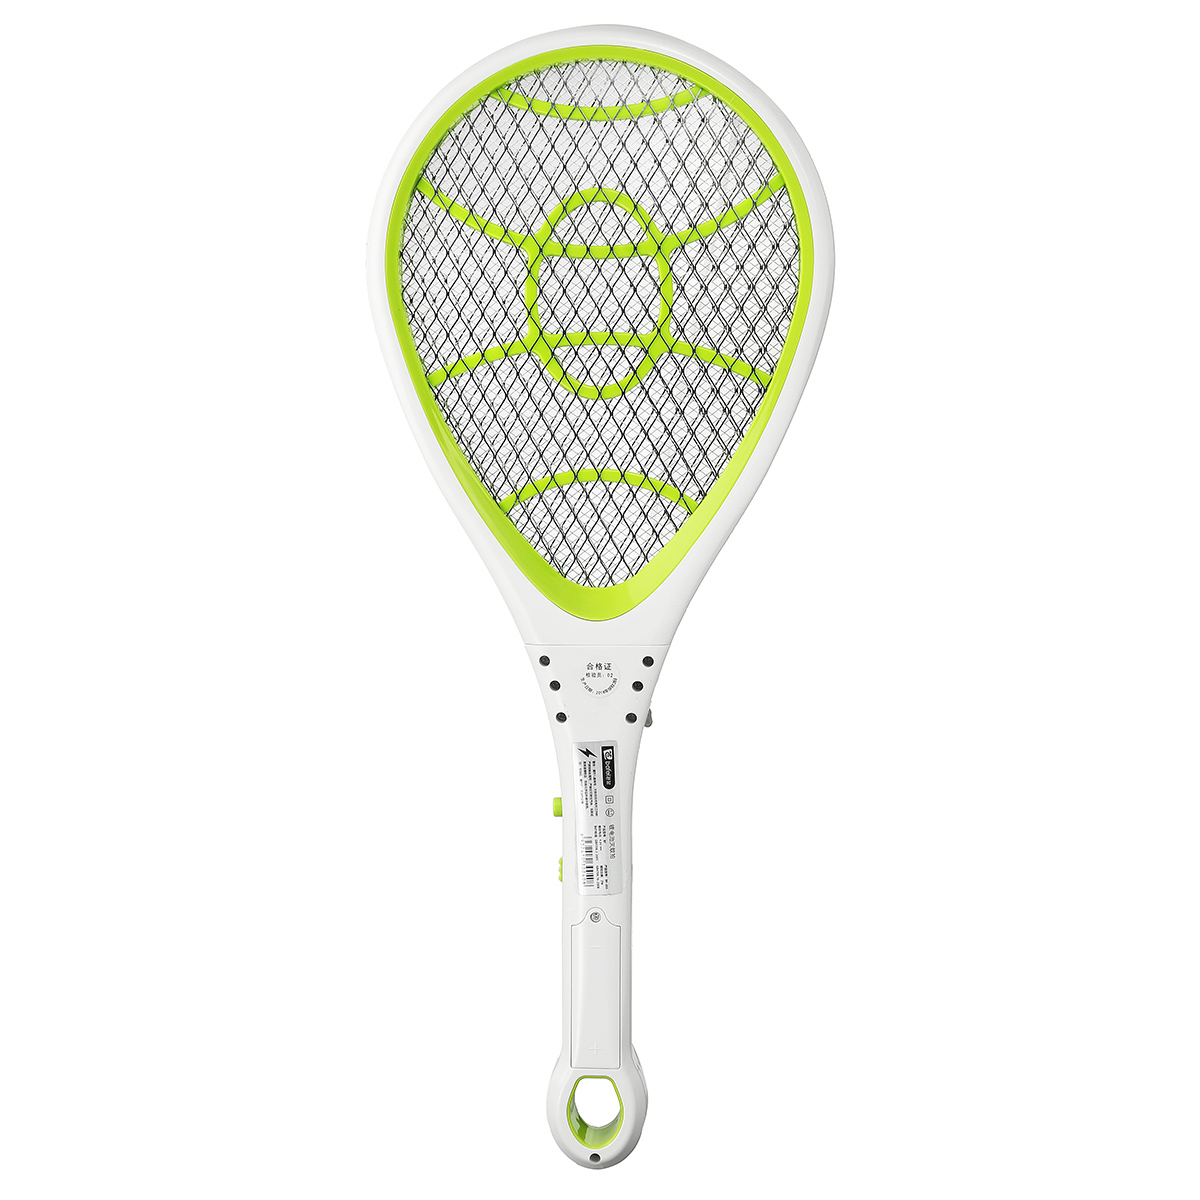 Cordless-Handheld-Bug-Zapper-Electric-Racket-Mosquito-Dispeller-Fly-Insect-Swatter-Killer-1437419